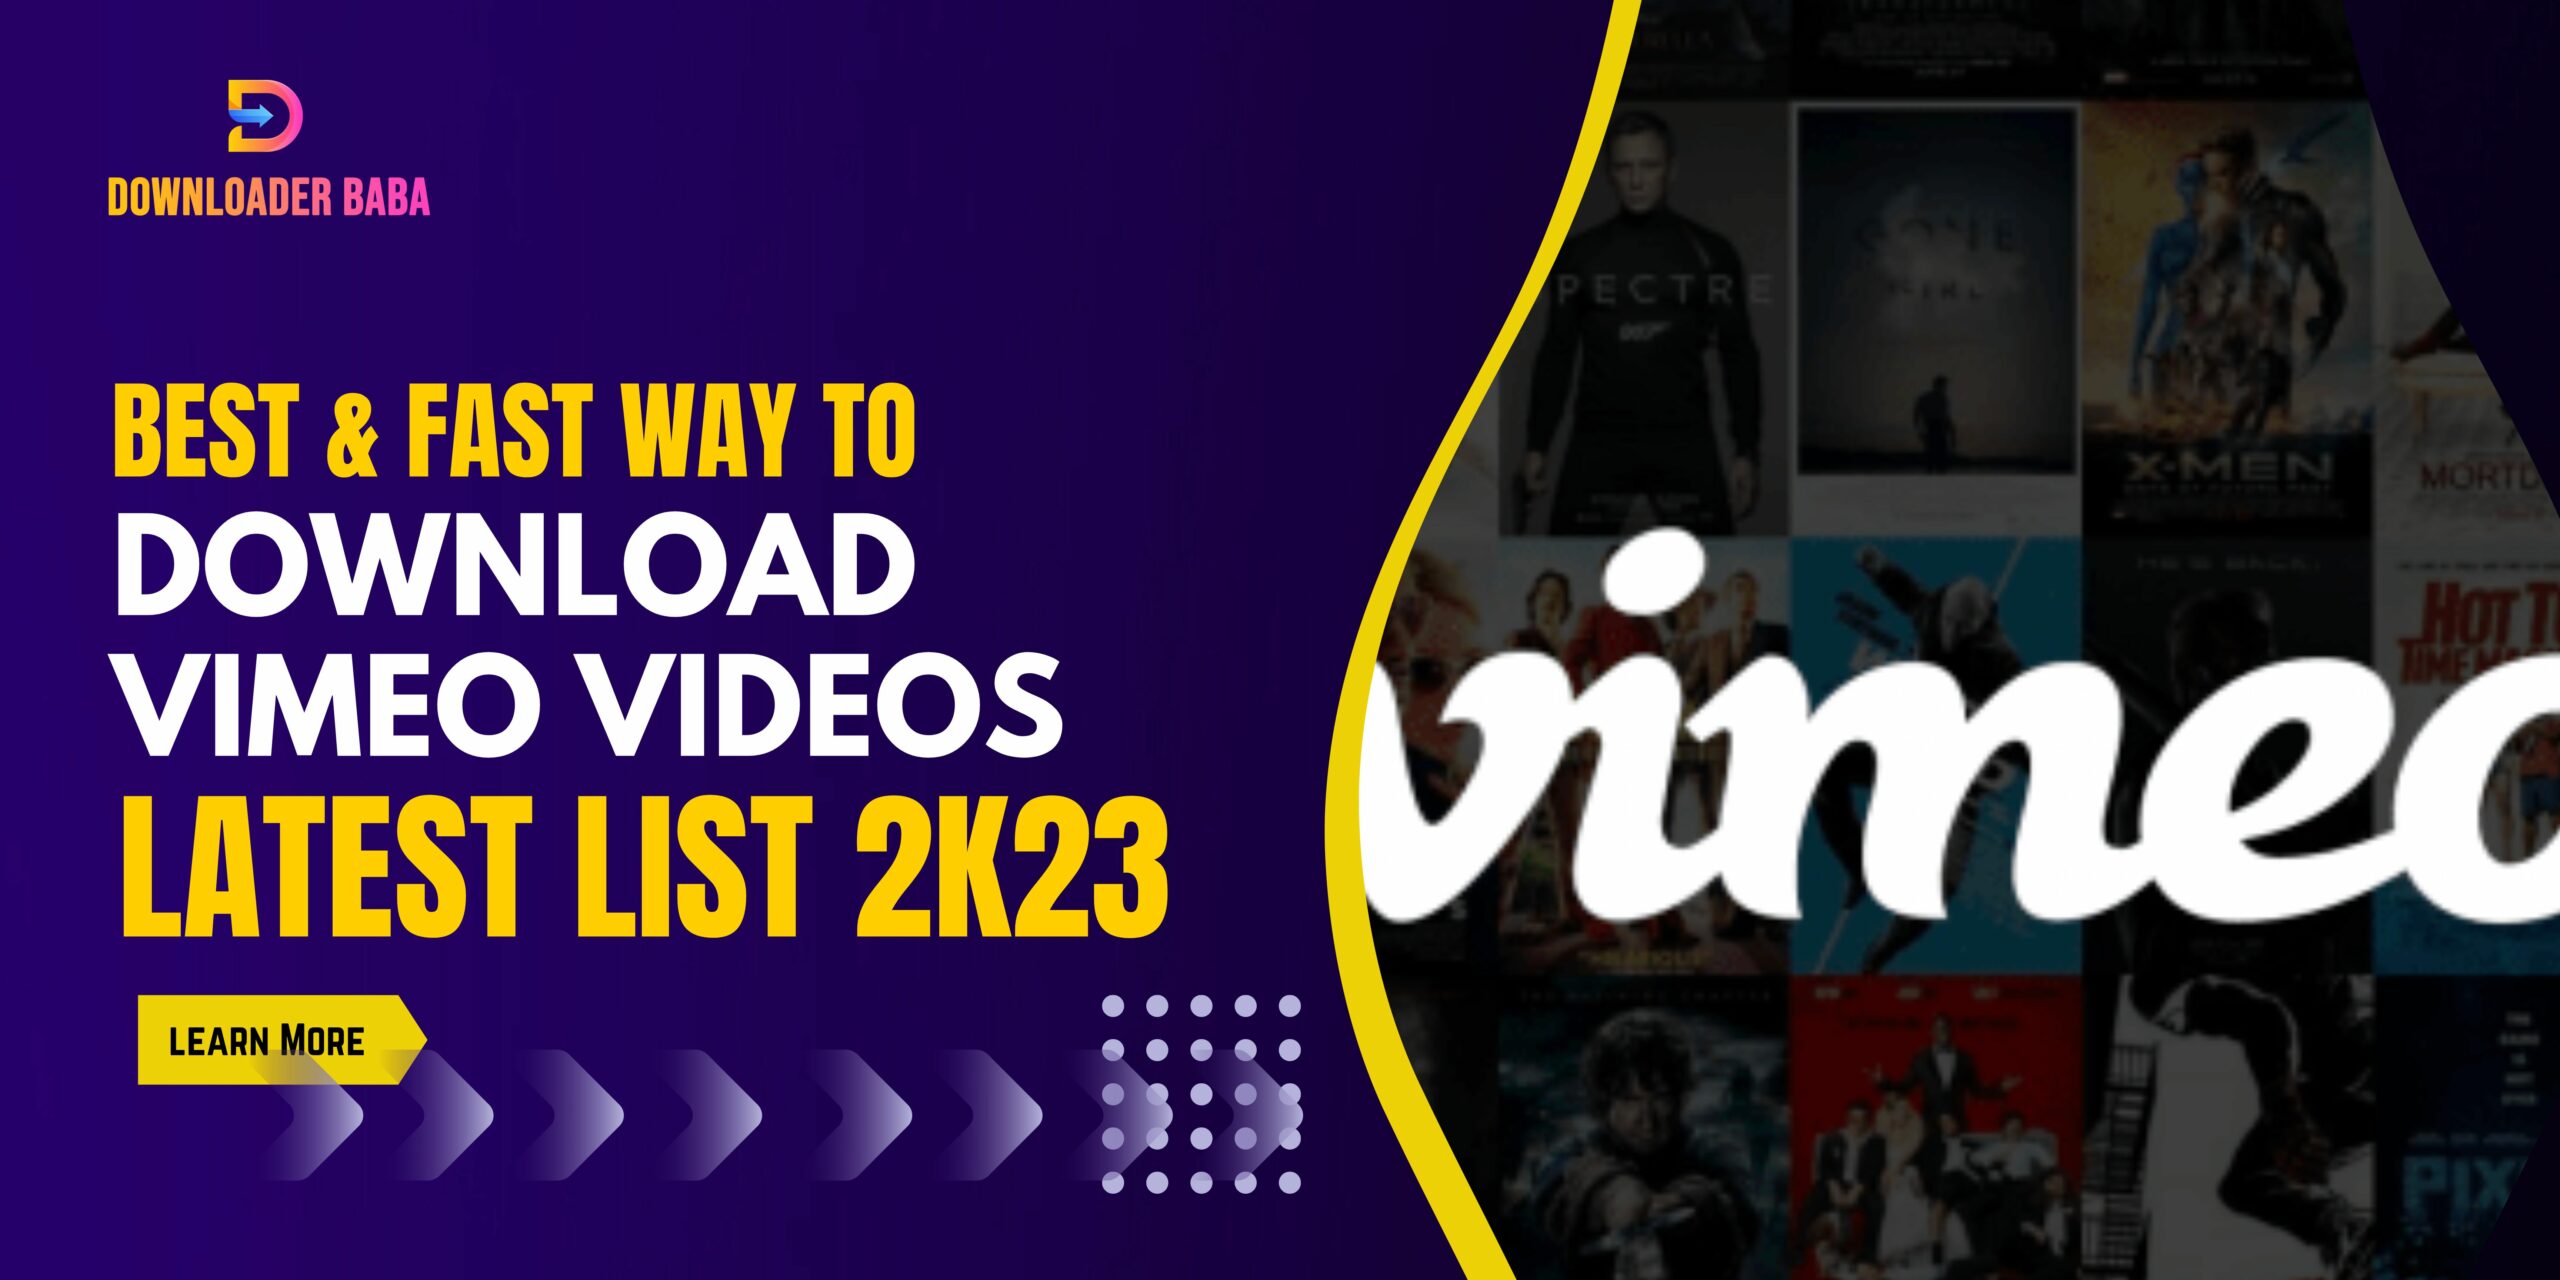 An image of Best & Fast Way to Download Vimeo Videos in 2023